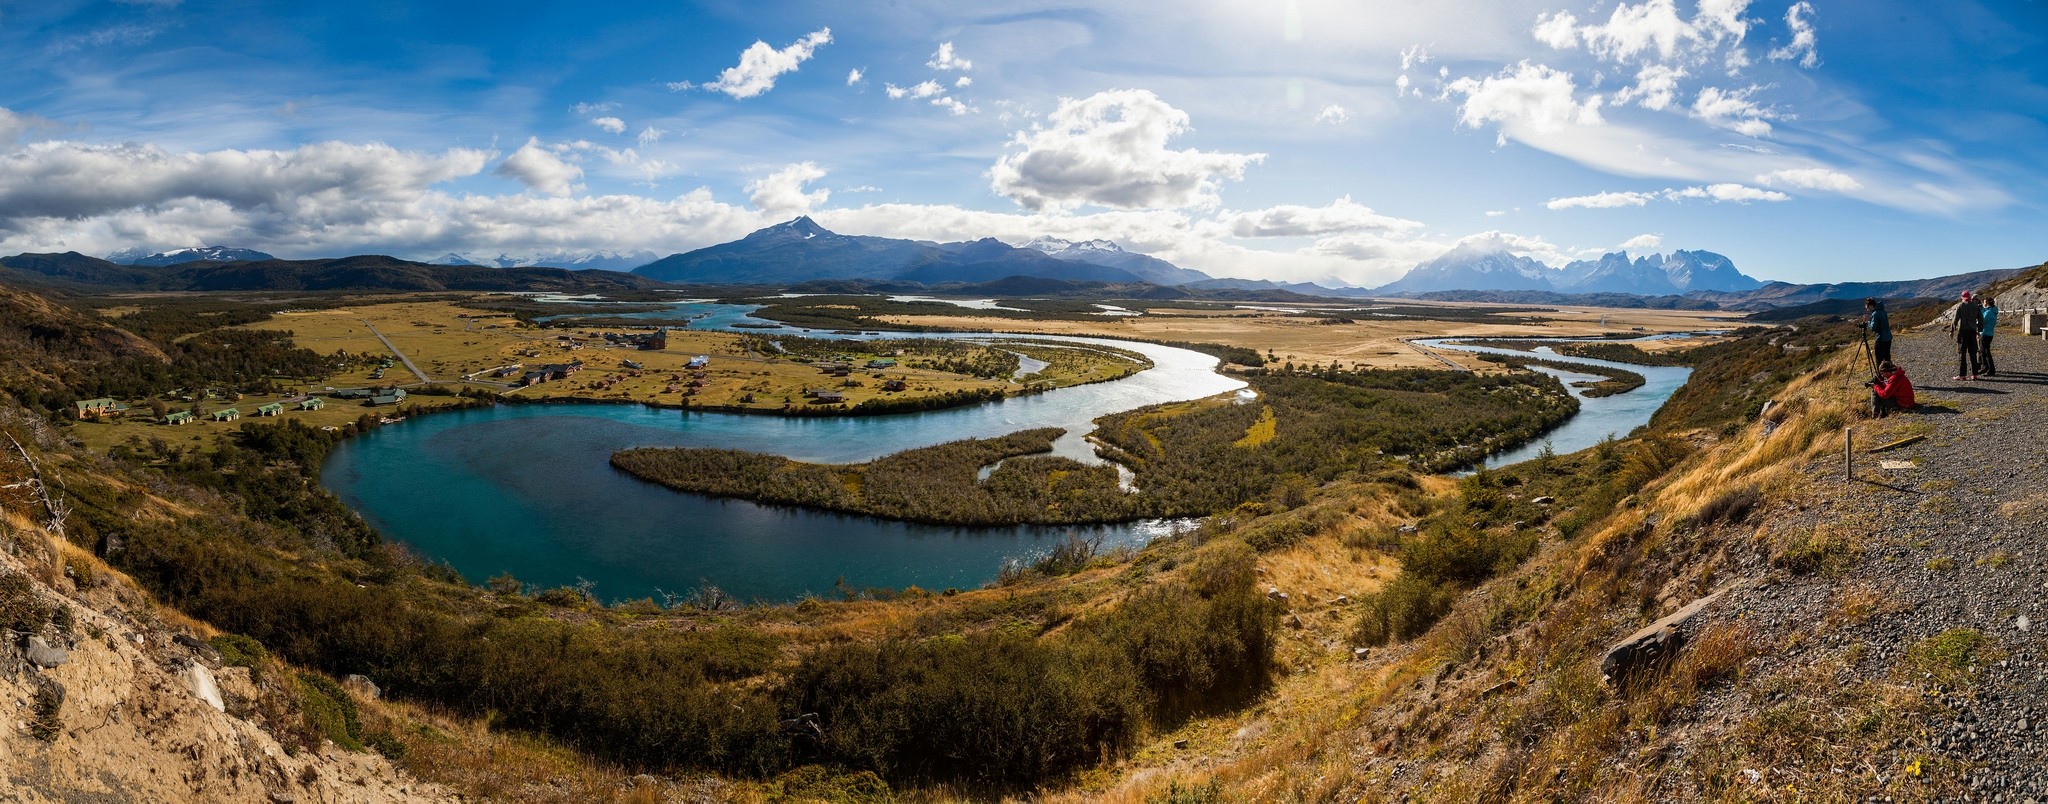 General 2048x804 nature landscape photography panorama river mountains clouds village shrubs people photographer Patagonia Chile South America